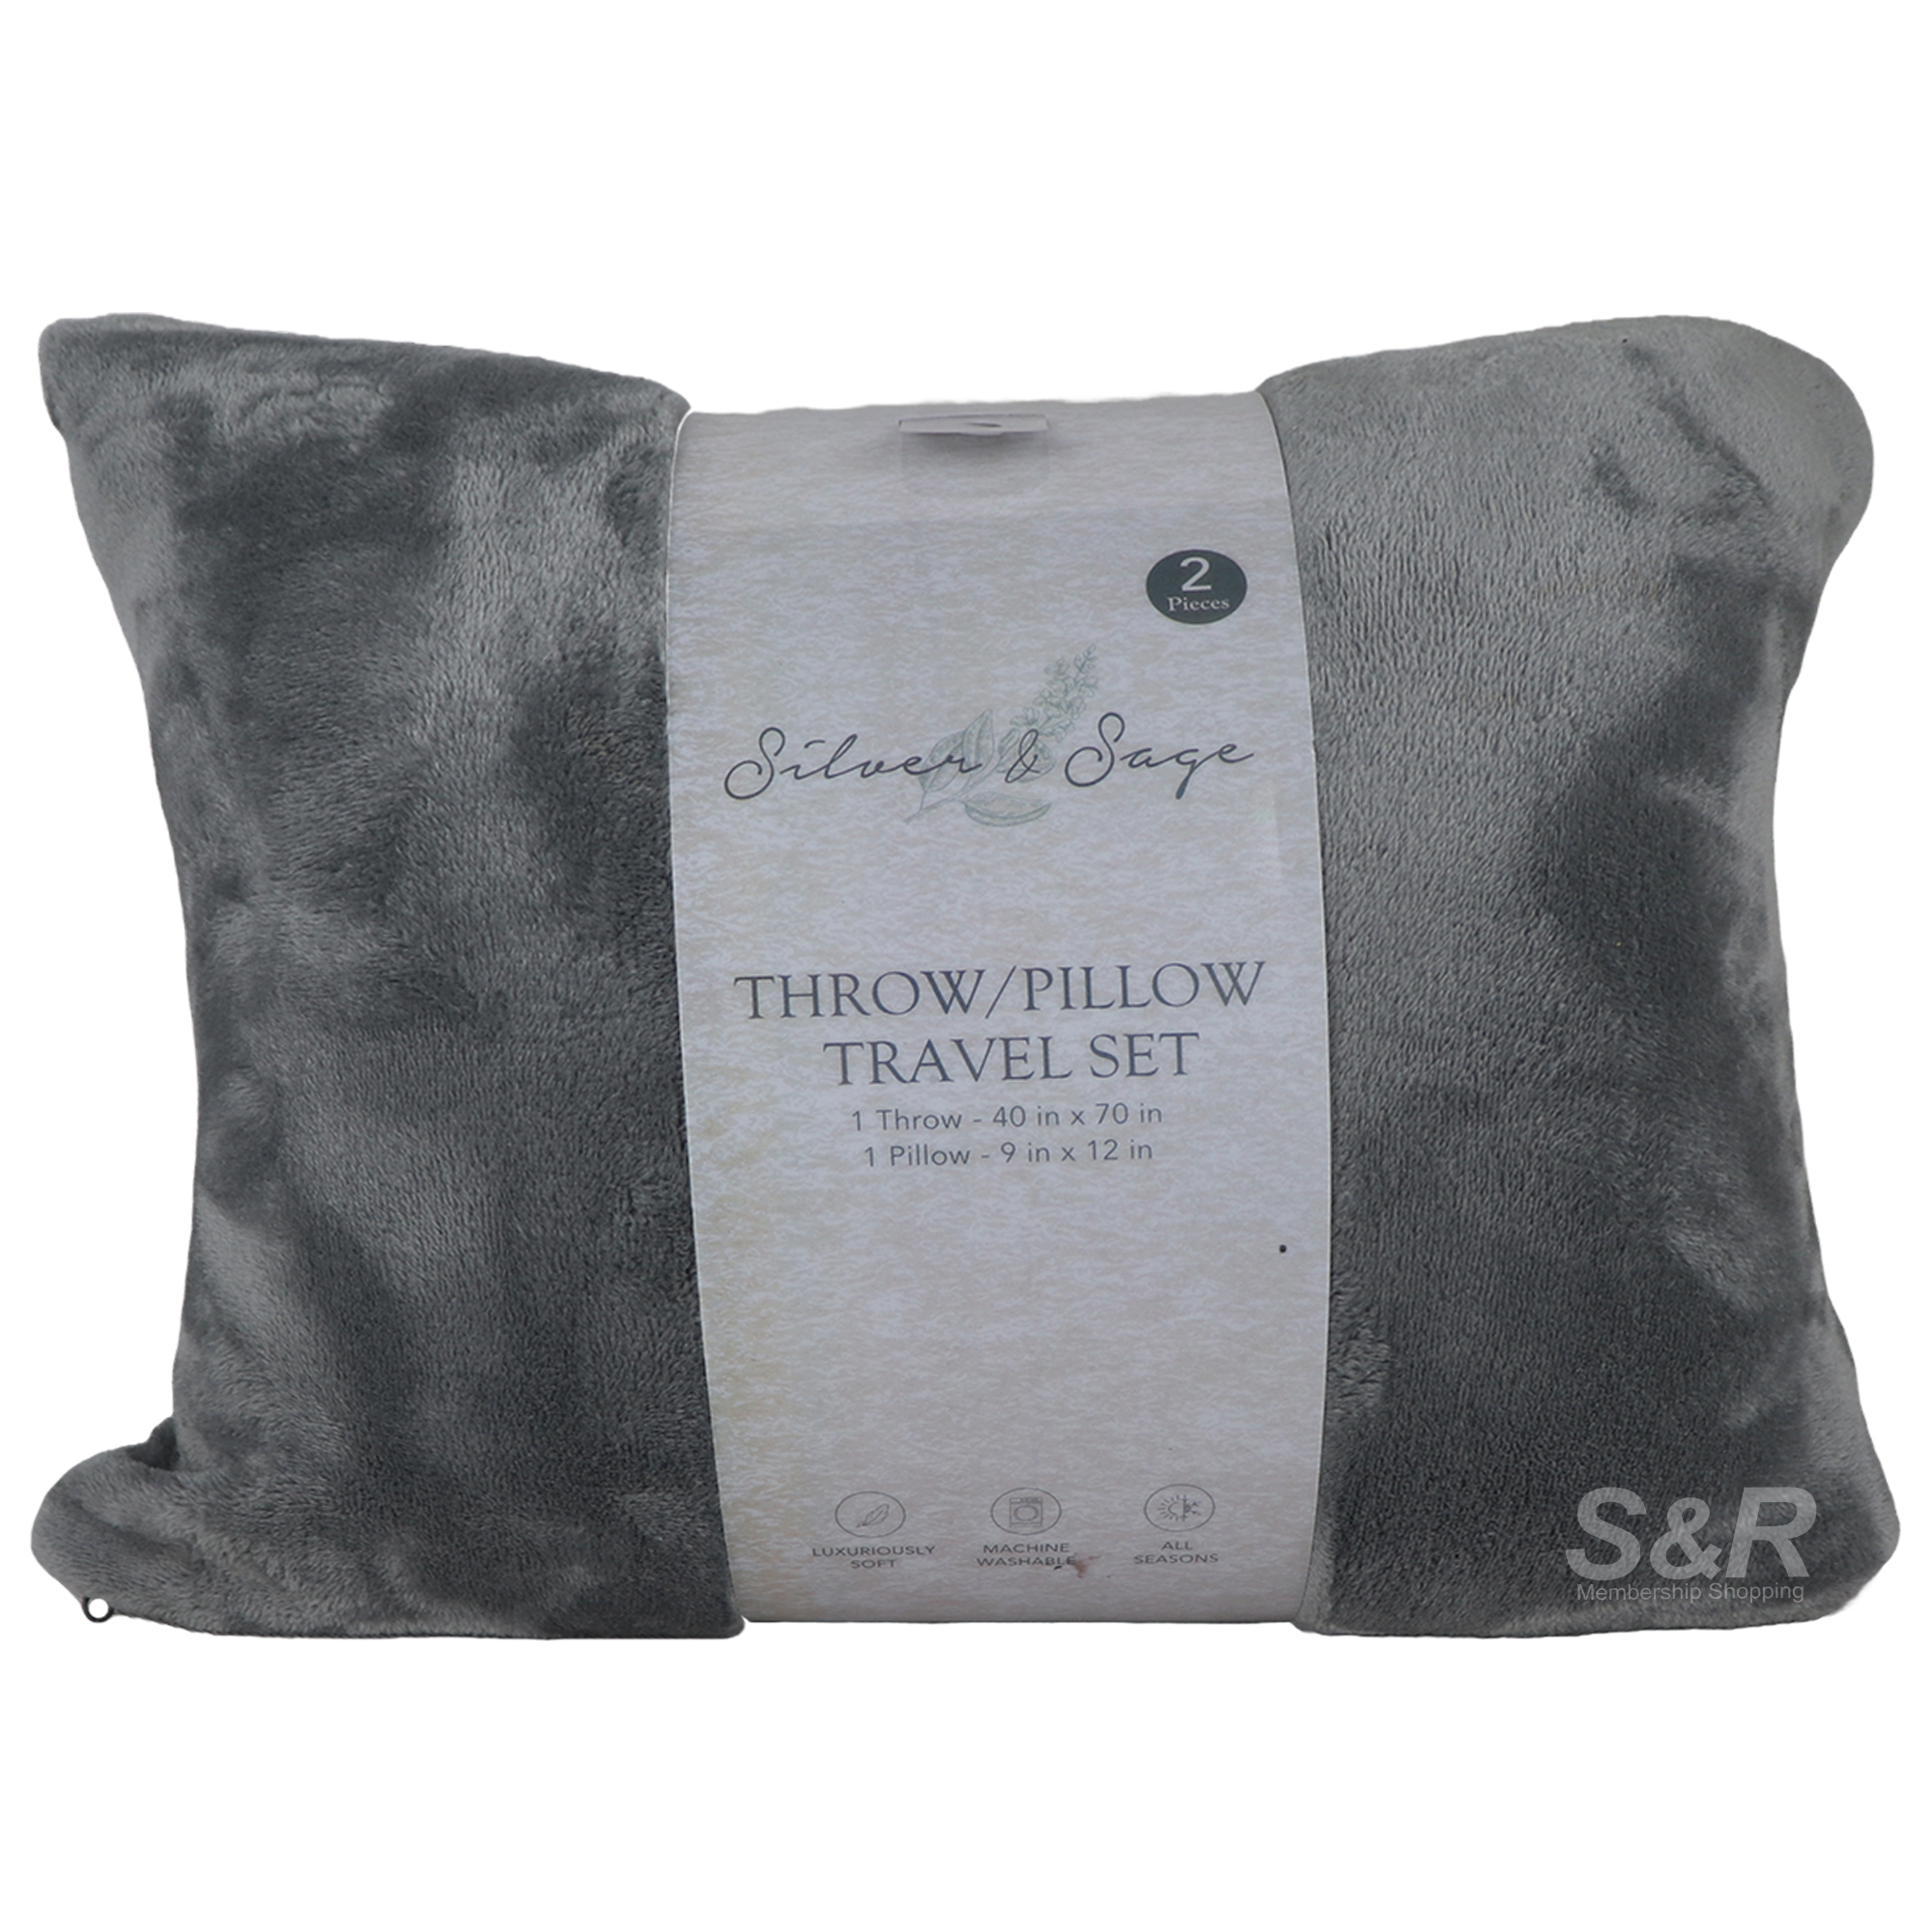 Silver and Sage Throw Pillow Travel Set